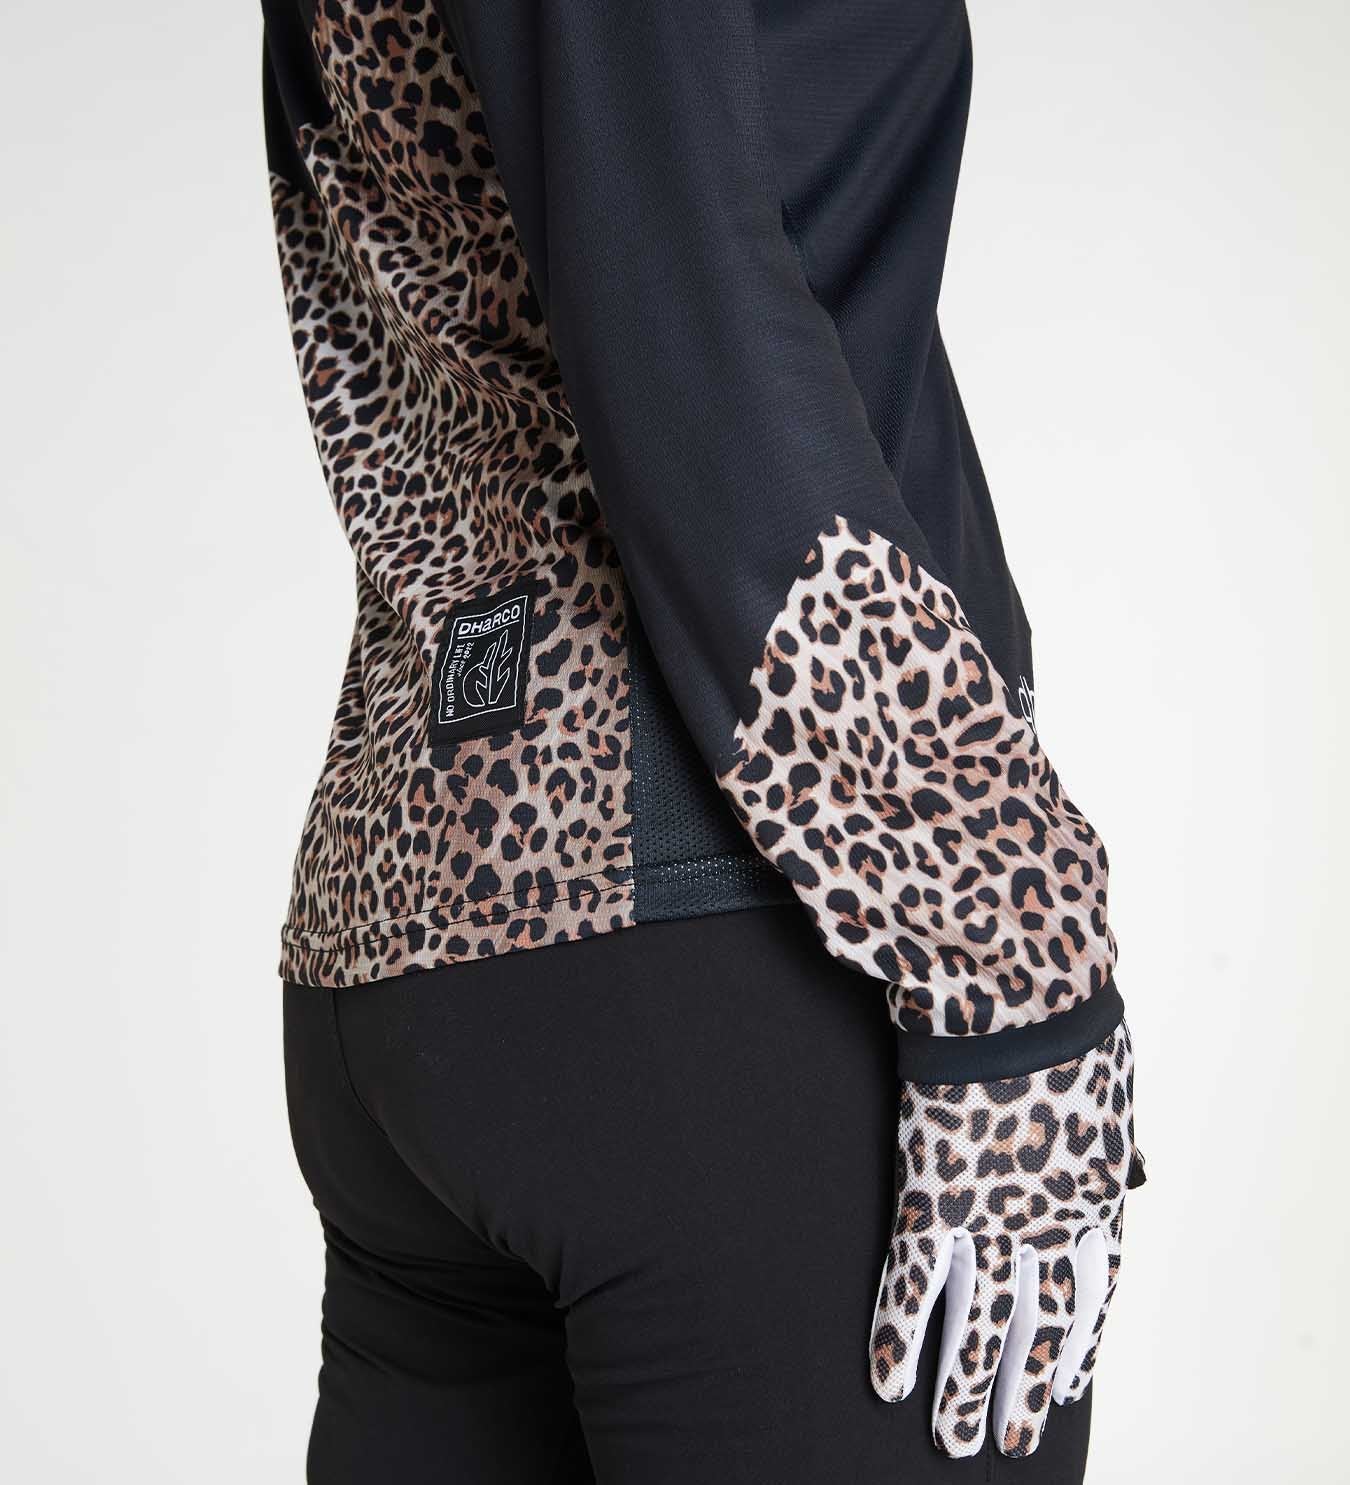 DHaRCO Ladies Long Sleeve Gravity Jersey - Leopard